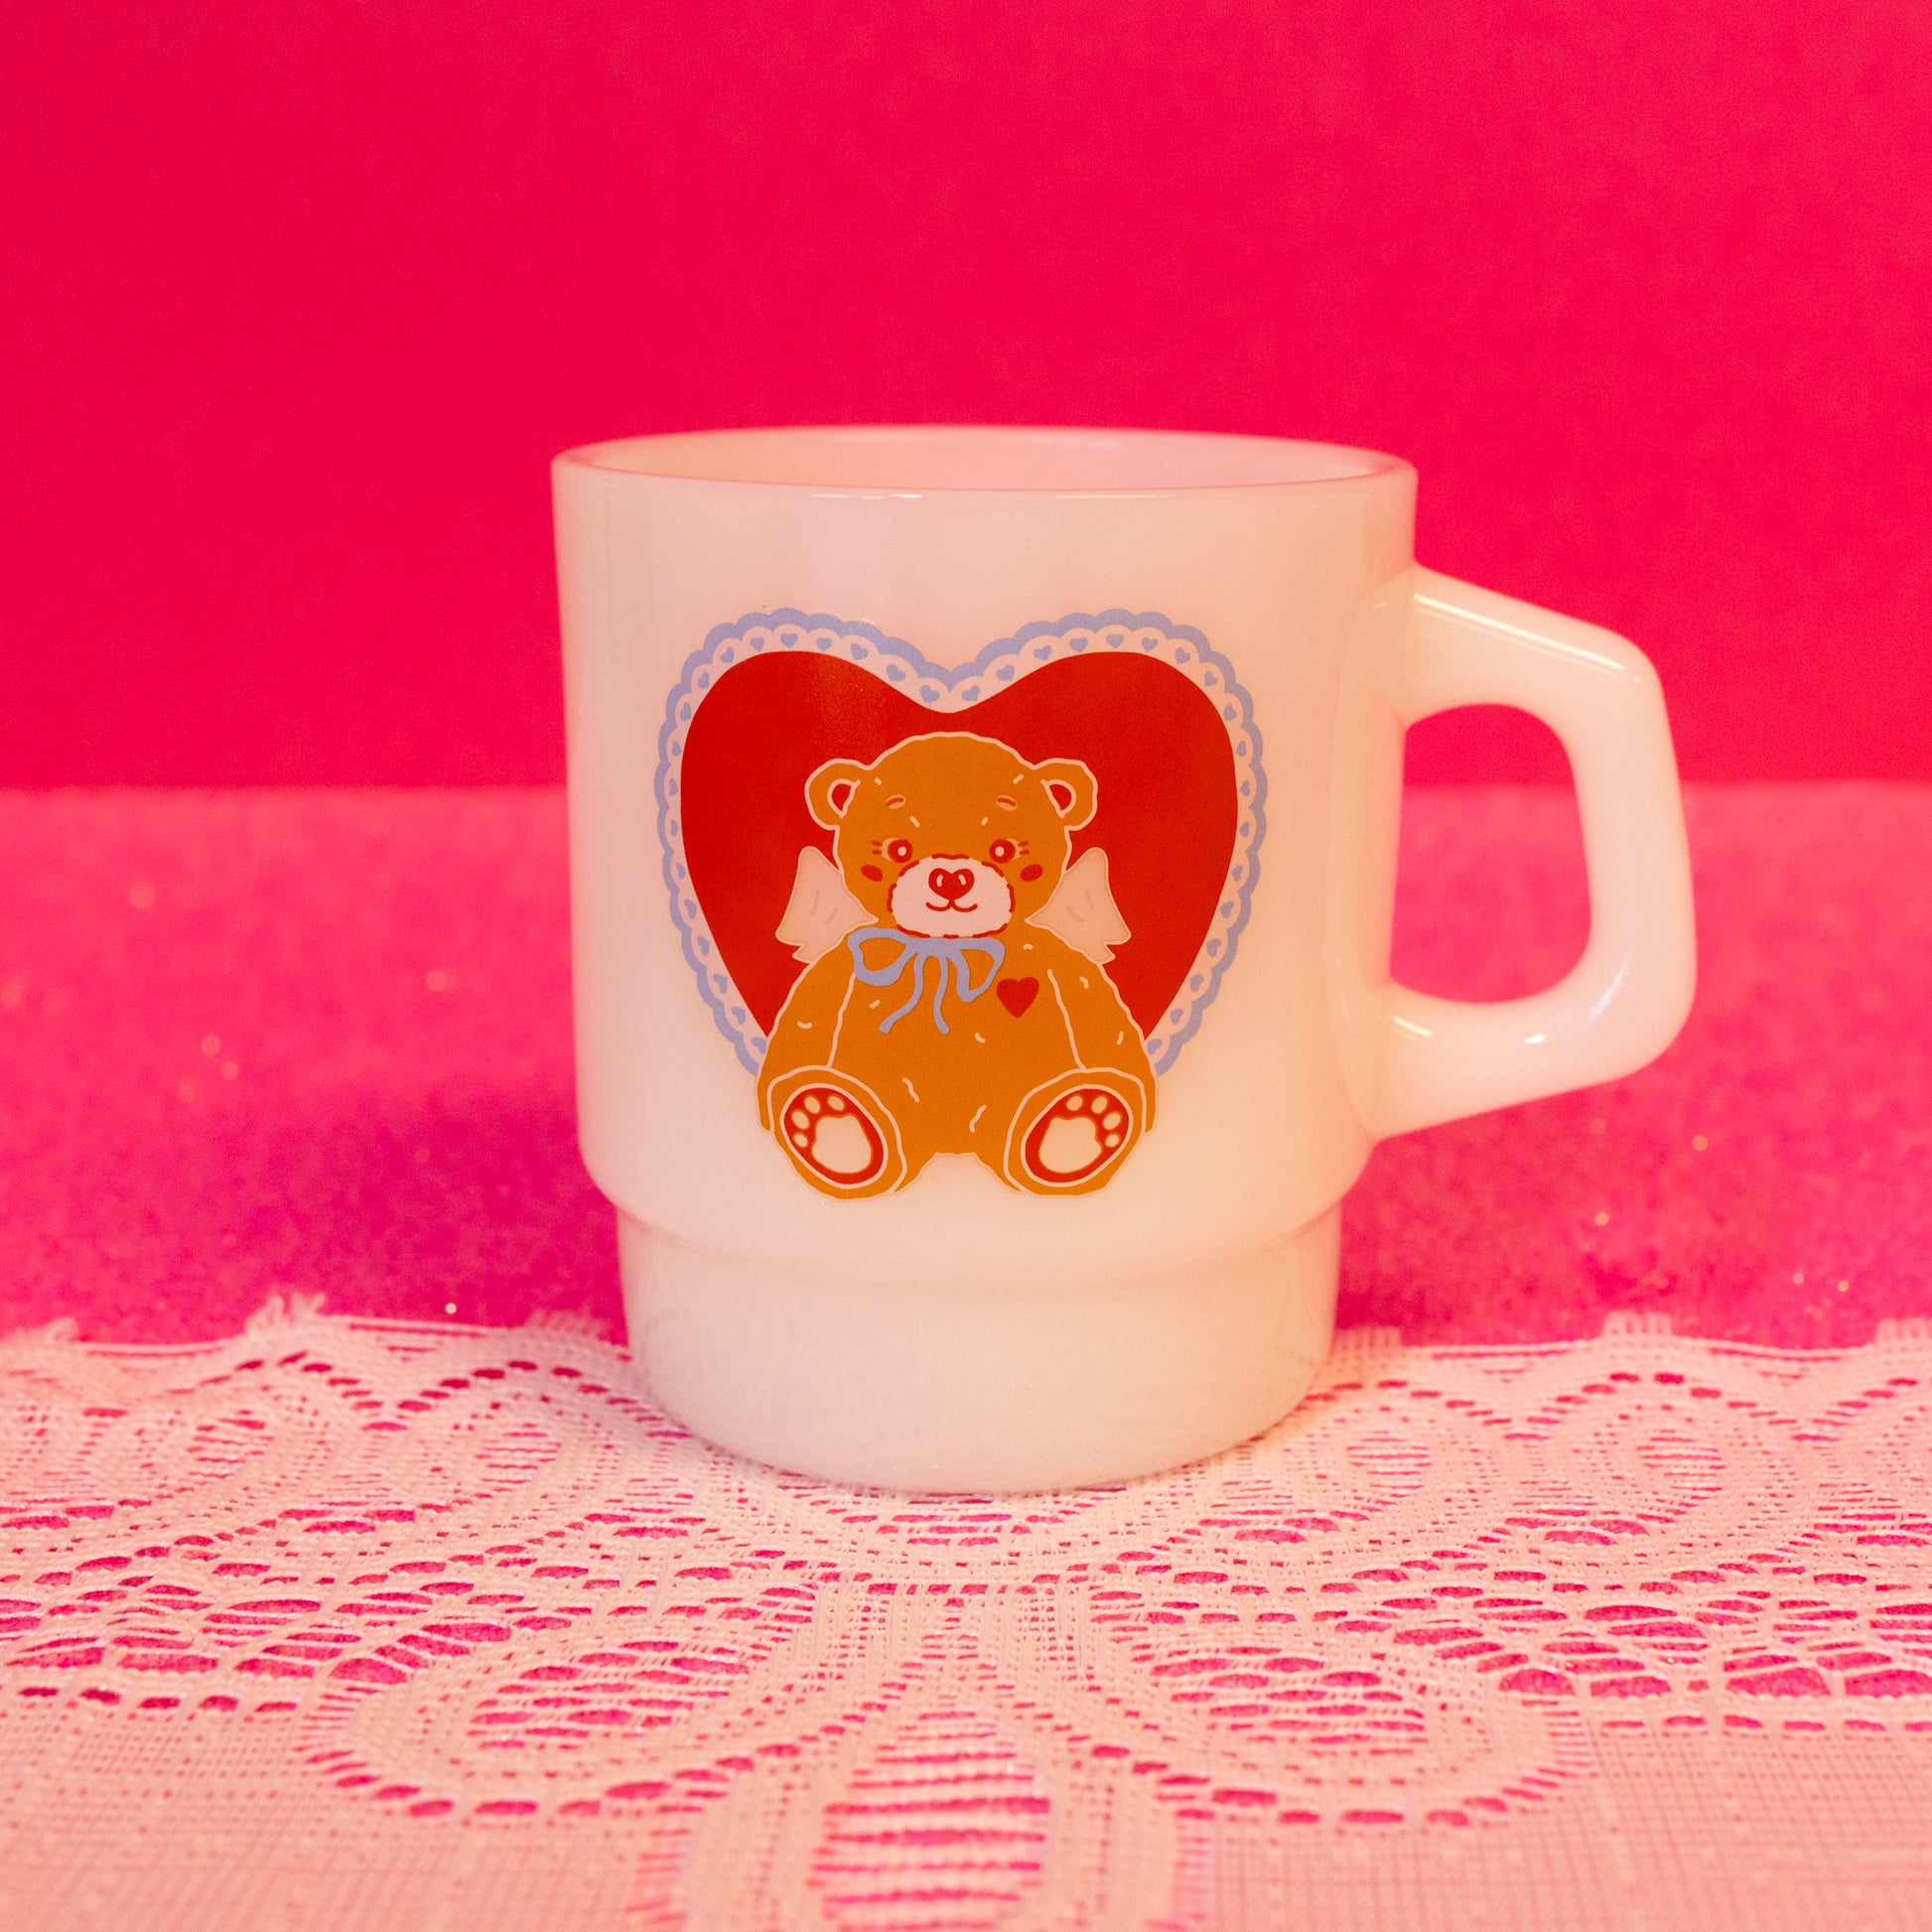 white mug with red heart and teddy bear